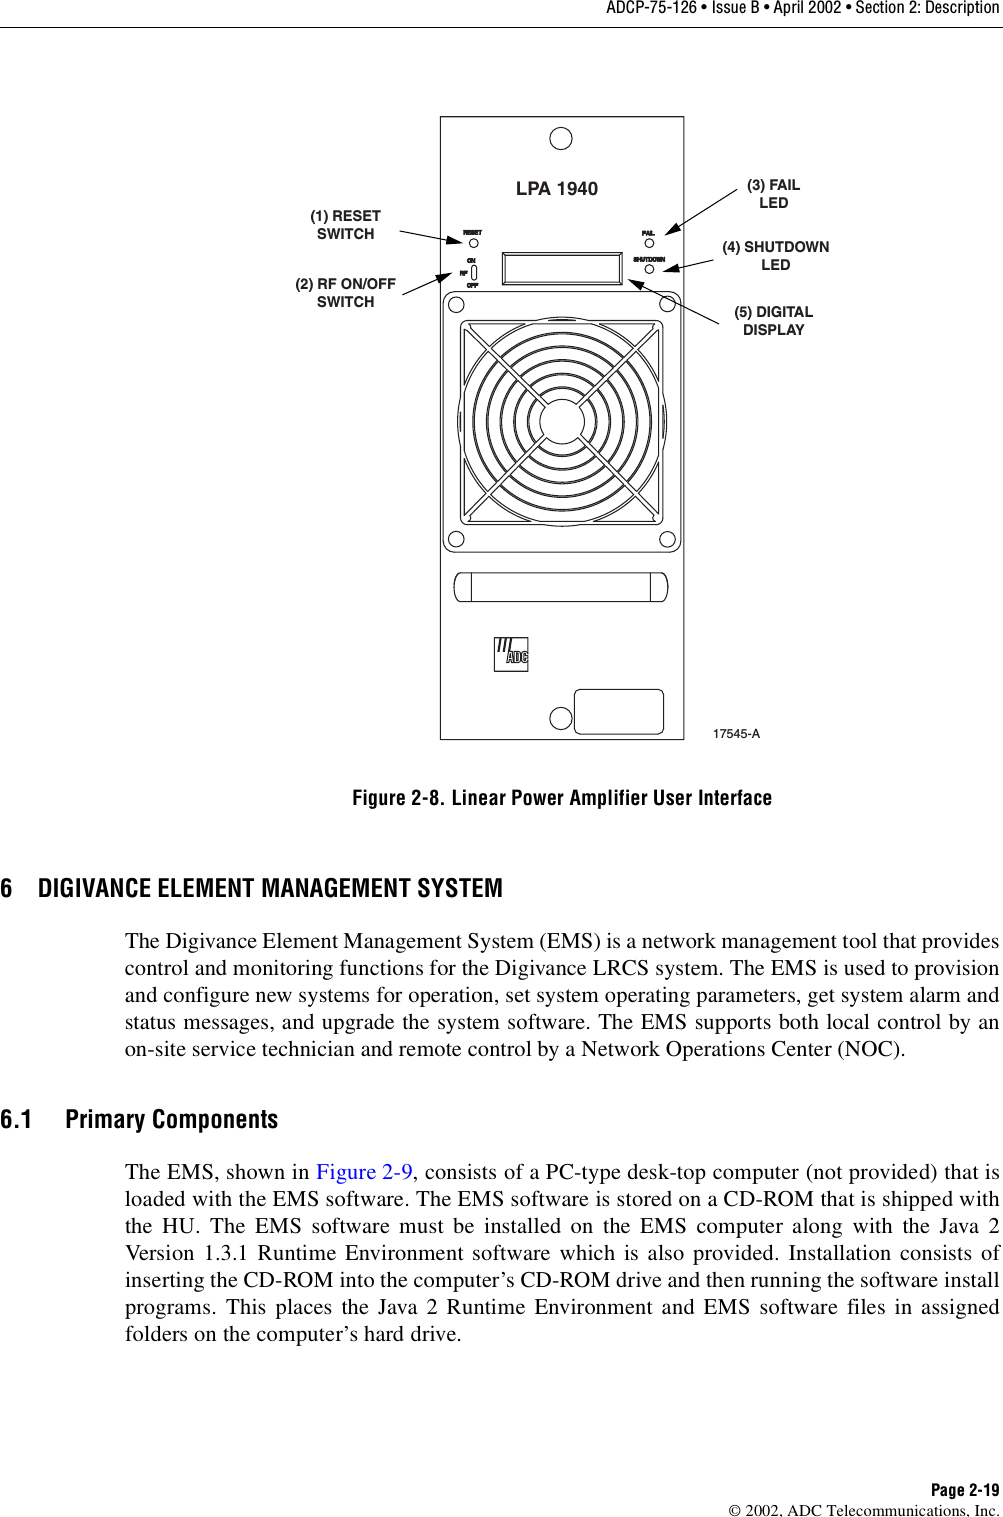 ADCP-75-126 • Issue B • April 2002 • Section 2: DescriptionPage 2-19©2002, ADC Telecommunications, Inc.Figure 2-8. Linear Power Amplifier User Interface6 DIGIVANCE ELEMENT MANAGEMENT SYSTEMThe Digivance Element Management System (EMS) is anetwork management tool that providescontrol and monitoring functions for the Digivance LRCS system. The EMS is used to provisionand configure new systems for operation, set system operating parameters, get system alarm andstatus messages, and upgrade the system software. The EMS supports both local control by anon-site service technician and remote control by aNetwork Operations Center (NOC).6.1 Primary ComponentsThe EMS, shown in Figure 2-9,consists of aPC-type desk-top computer (not provided) that isloaded with the EMS software. The EMS software is stored on aCD-ROM that is shipped withthe HU. The EMS software must be installed on the EMS computer along with the Java 2Version 1.3.1 Runtime Environment software which is also provided. Installation consists ofinserting the CD-ROM into the computer’s CD-ROM drive and then running the software installprograms. This places the Java 2Runtime Environment and EMS software files in assignedfolders on the computer’s hard drive.(1) RESETSWITCH(2) RF ON/OFFSWITCH(3) FAILLED(4) SHUTDOWNLED(5) DIGITALDISPLAY17545-ALPA 1940